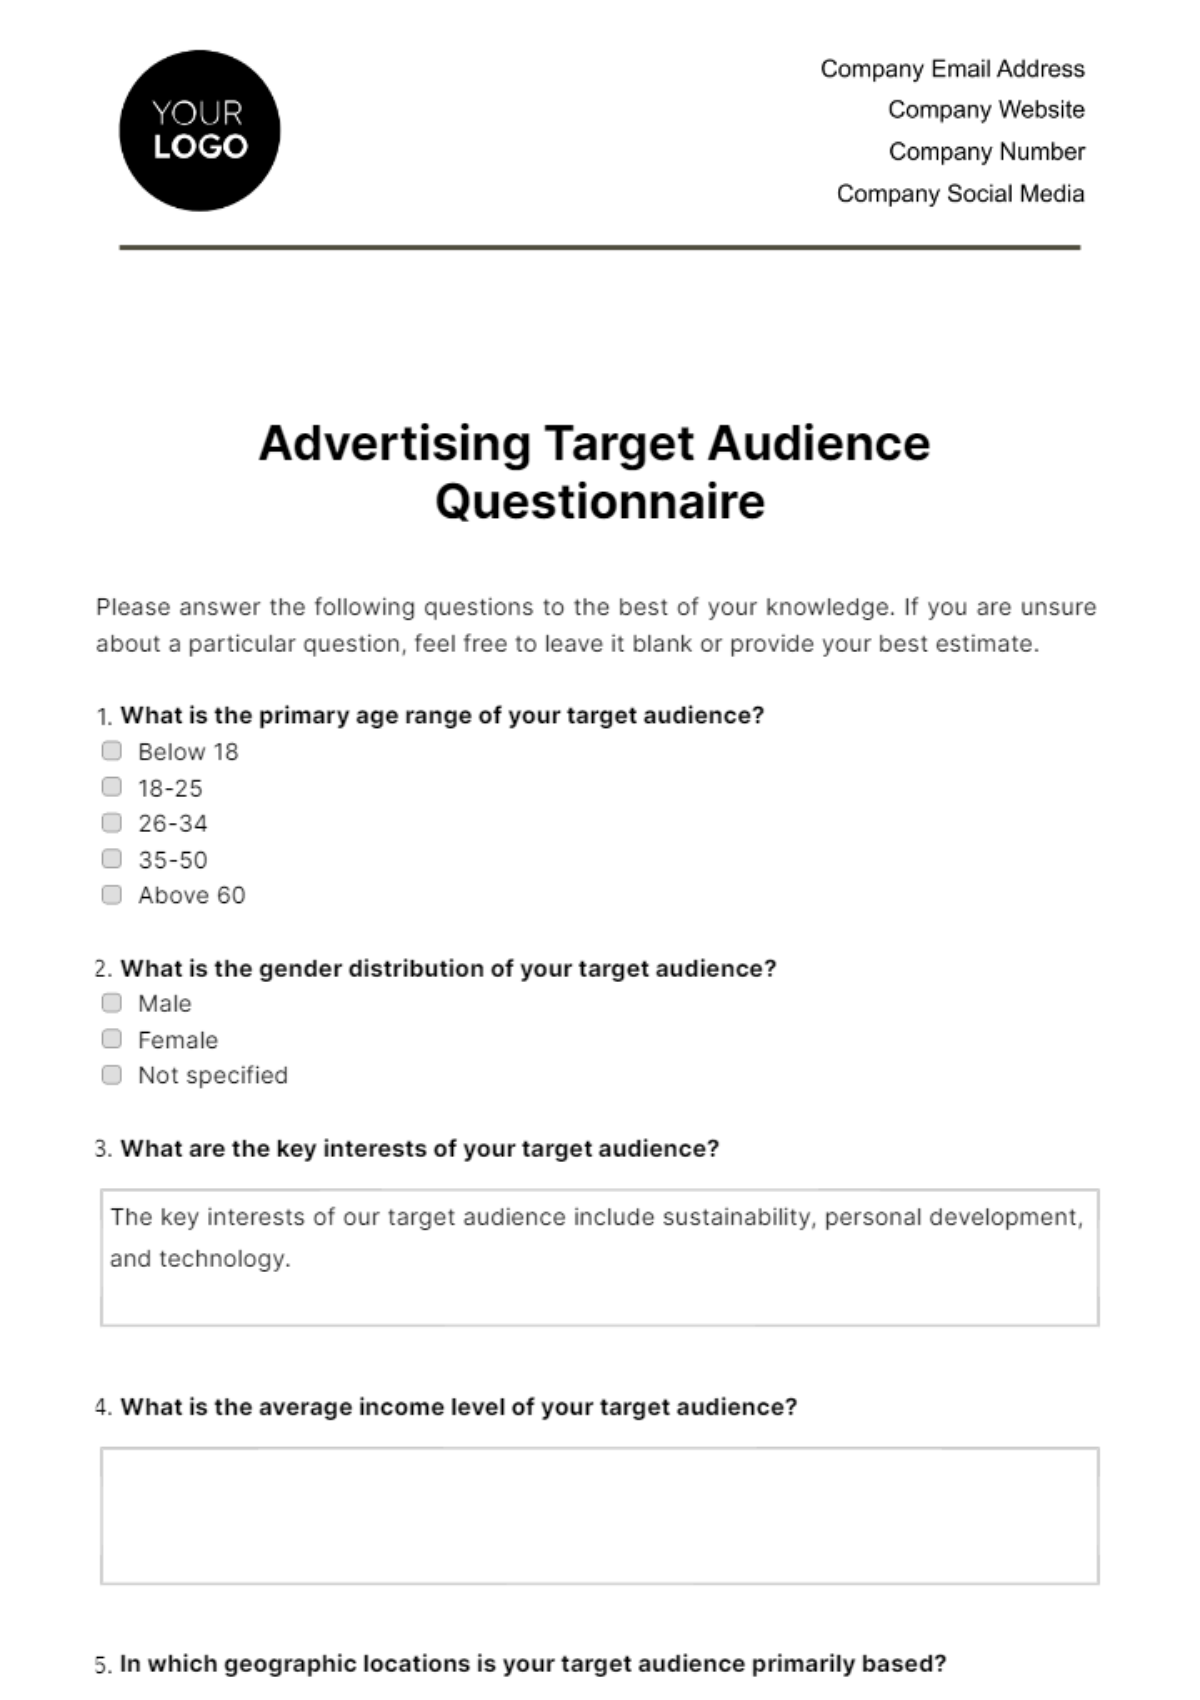 Advertising Target Audience Questionnaire Template